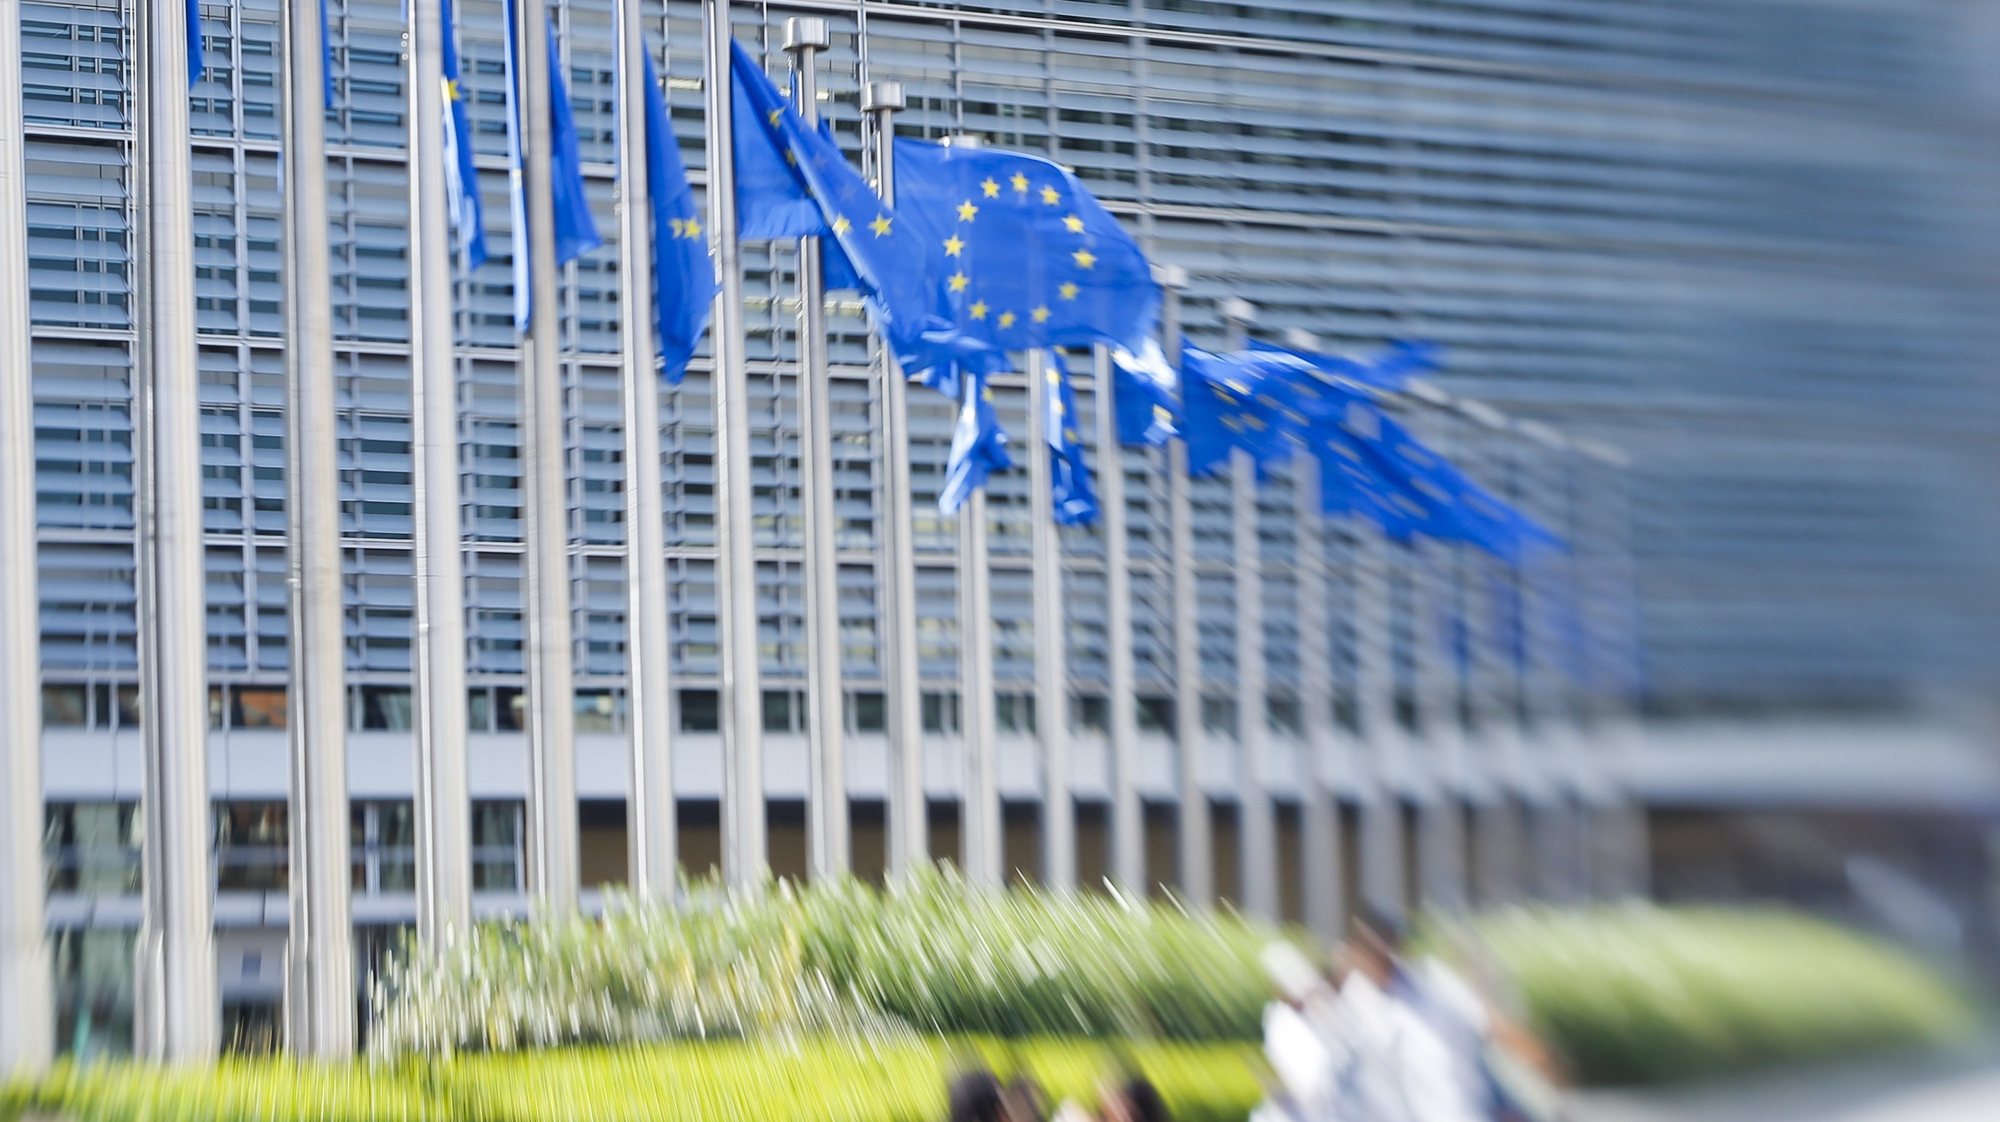 epa07239705 (FILE) - European flags in front of European Commission headquarters in Brussels, Belgium, 26 June 2018 (reissued 19 December 2018). According to a report by the New York Times, hackers have allegedly intercepted communications of European Union diplomatic staff for several years.  EPA/OLIVIER HOSLET